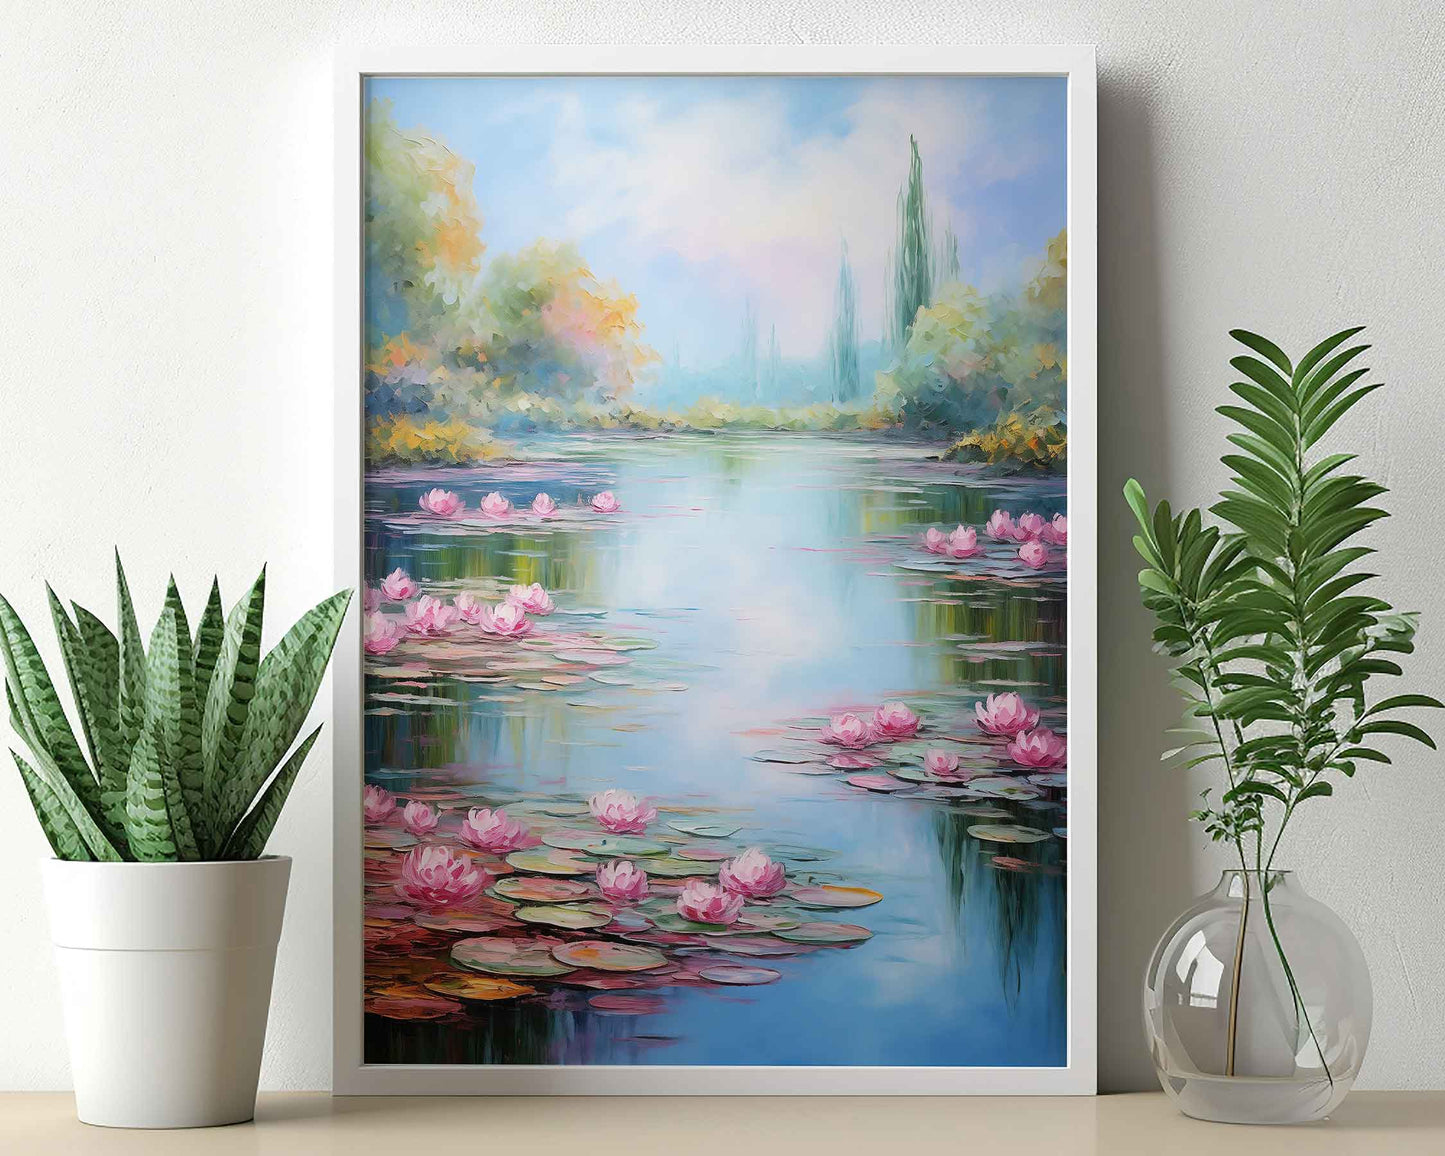 Framed Image of Monet Style Lake With Pink Lilies Wall Art Print Poster